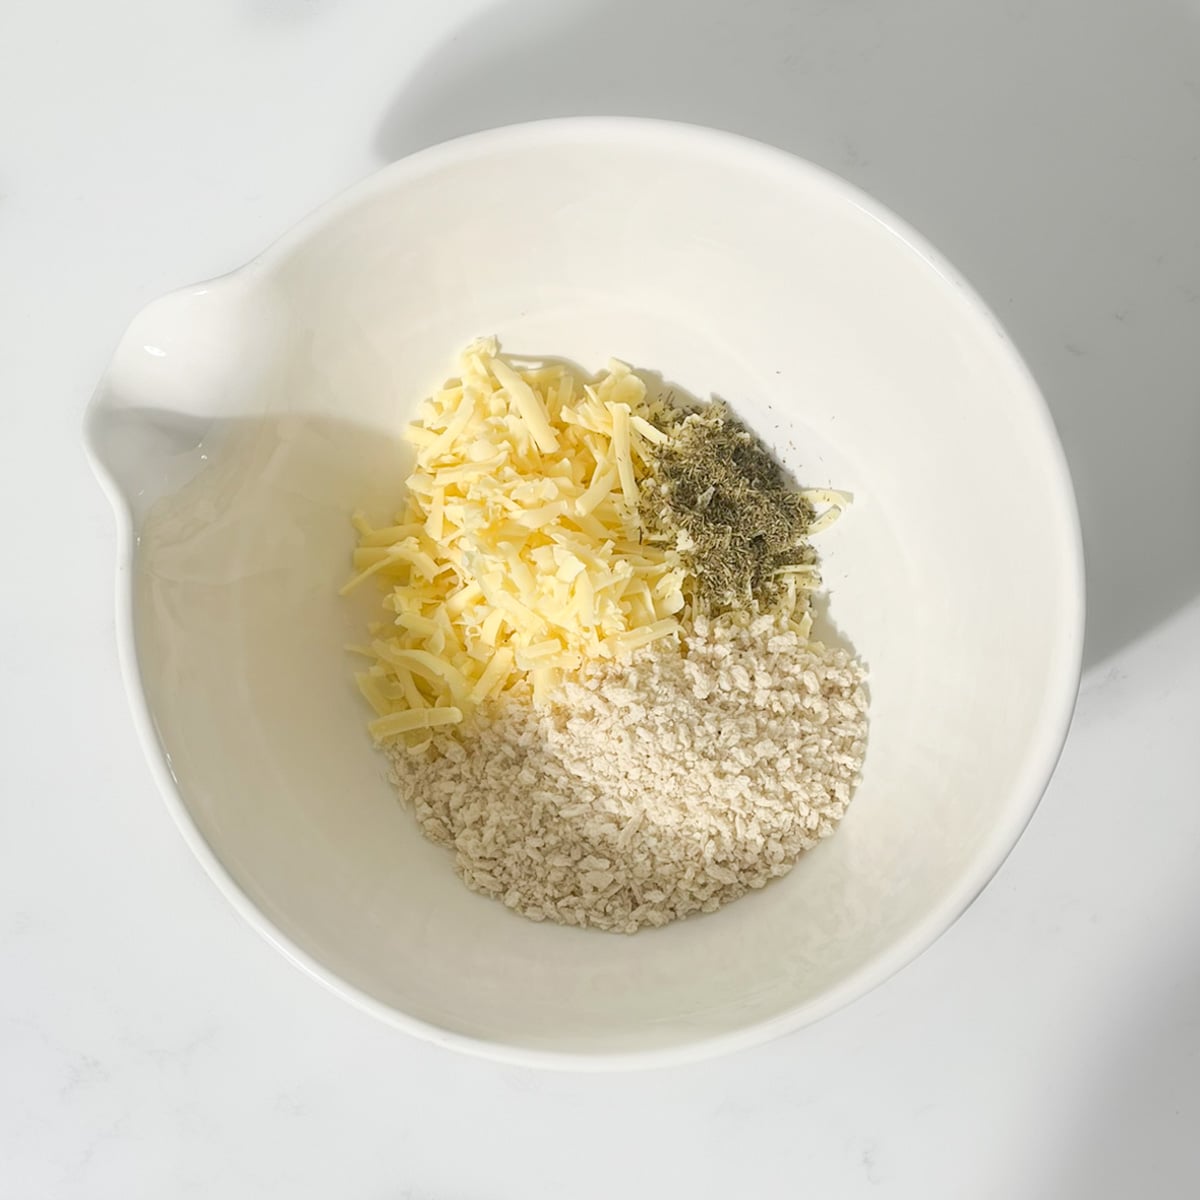 Breadcrumbs, cheese and herbs in a large white bowl.